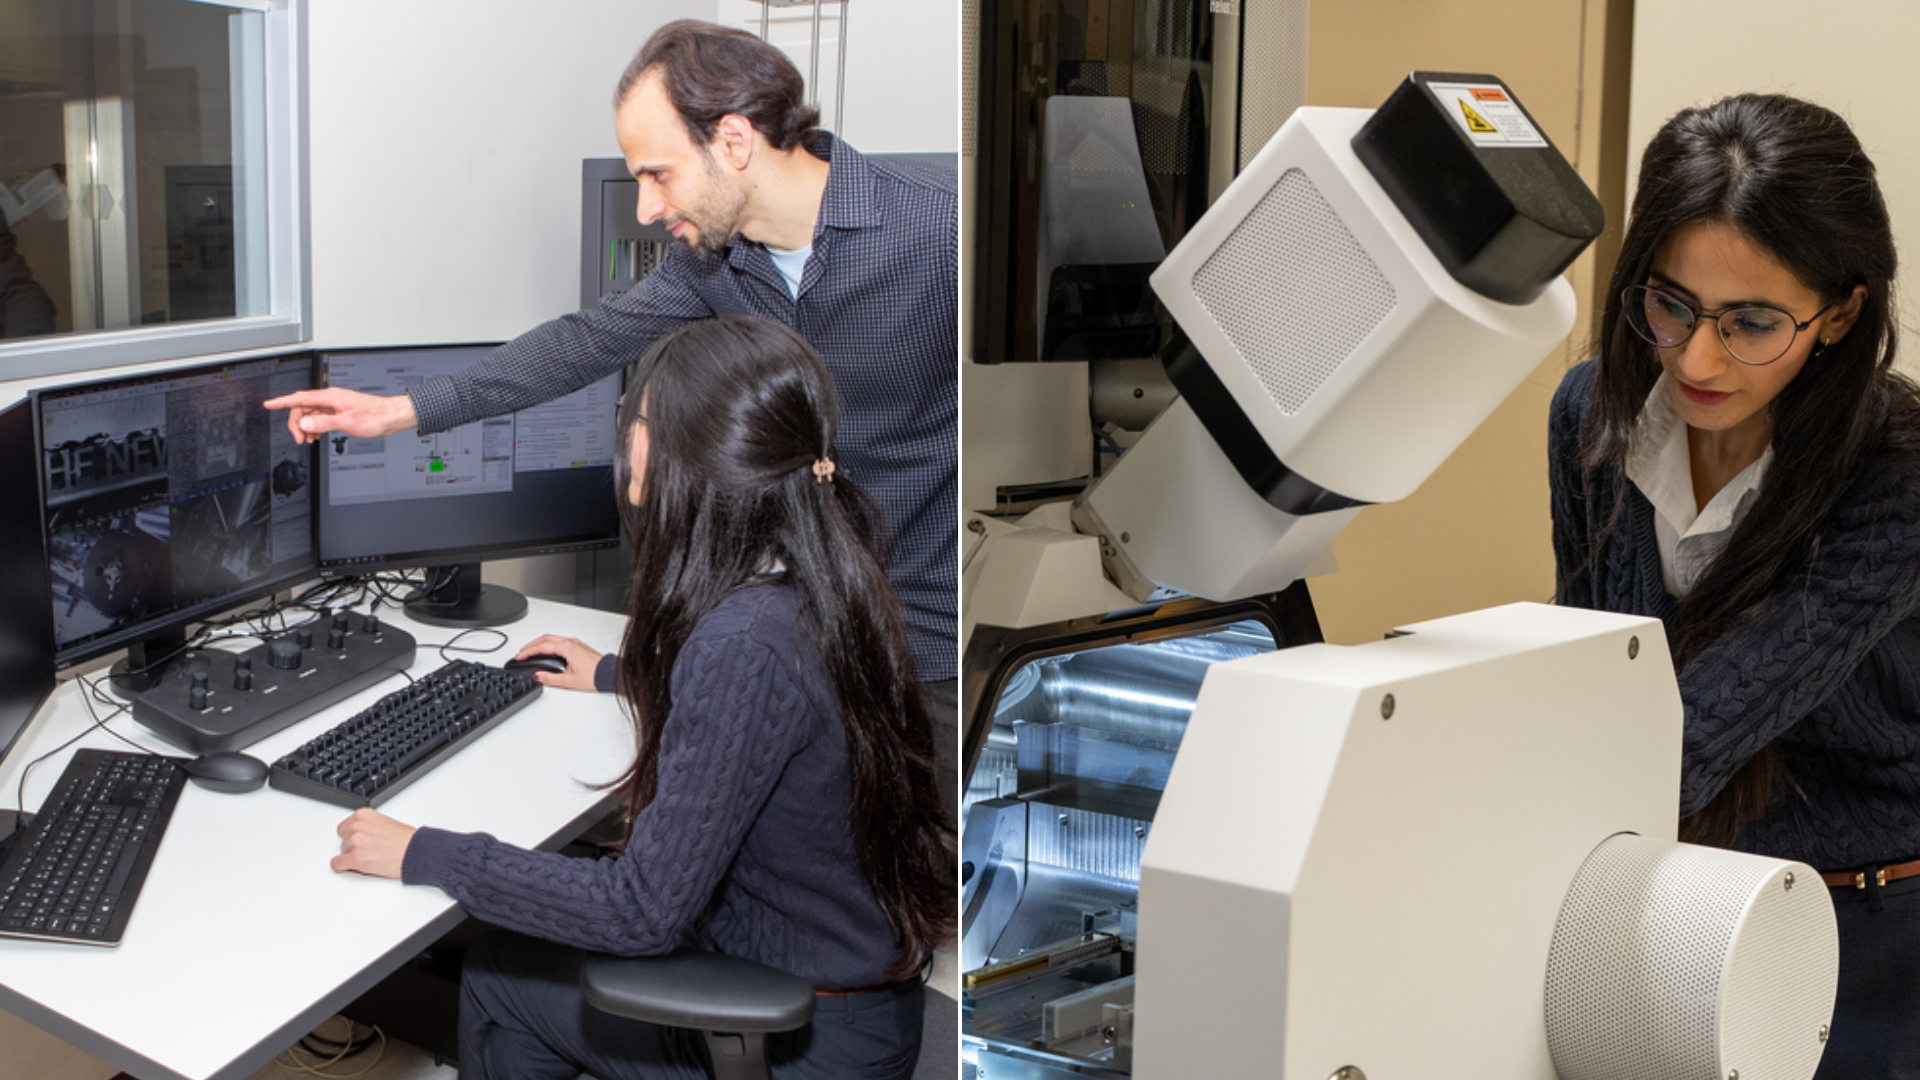 Two photos side-by-side. On the left, two people - one seated and one standing - look at a computer monitor. One the right, a woman is bent over operating an electron microscope. 